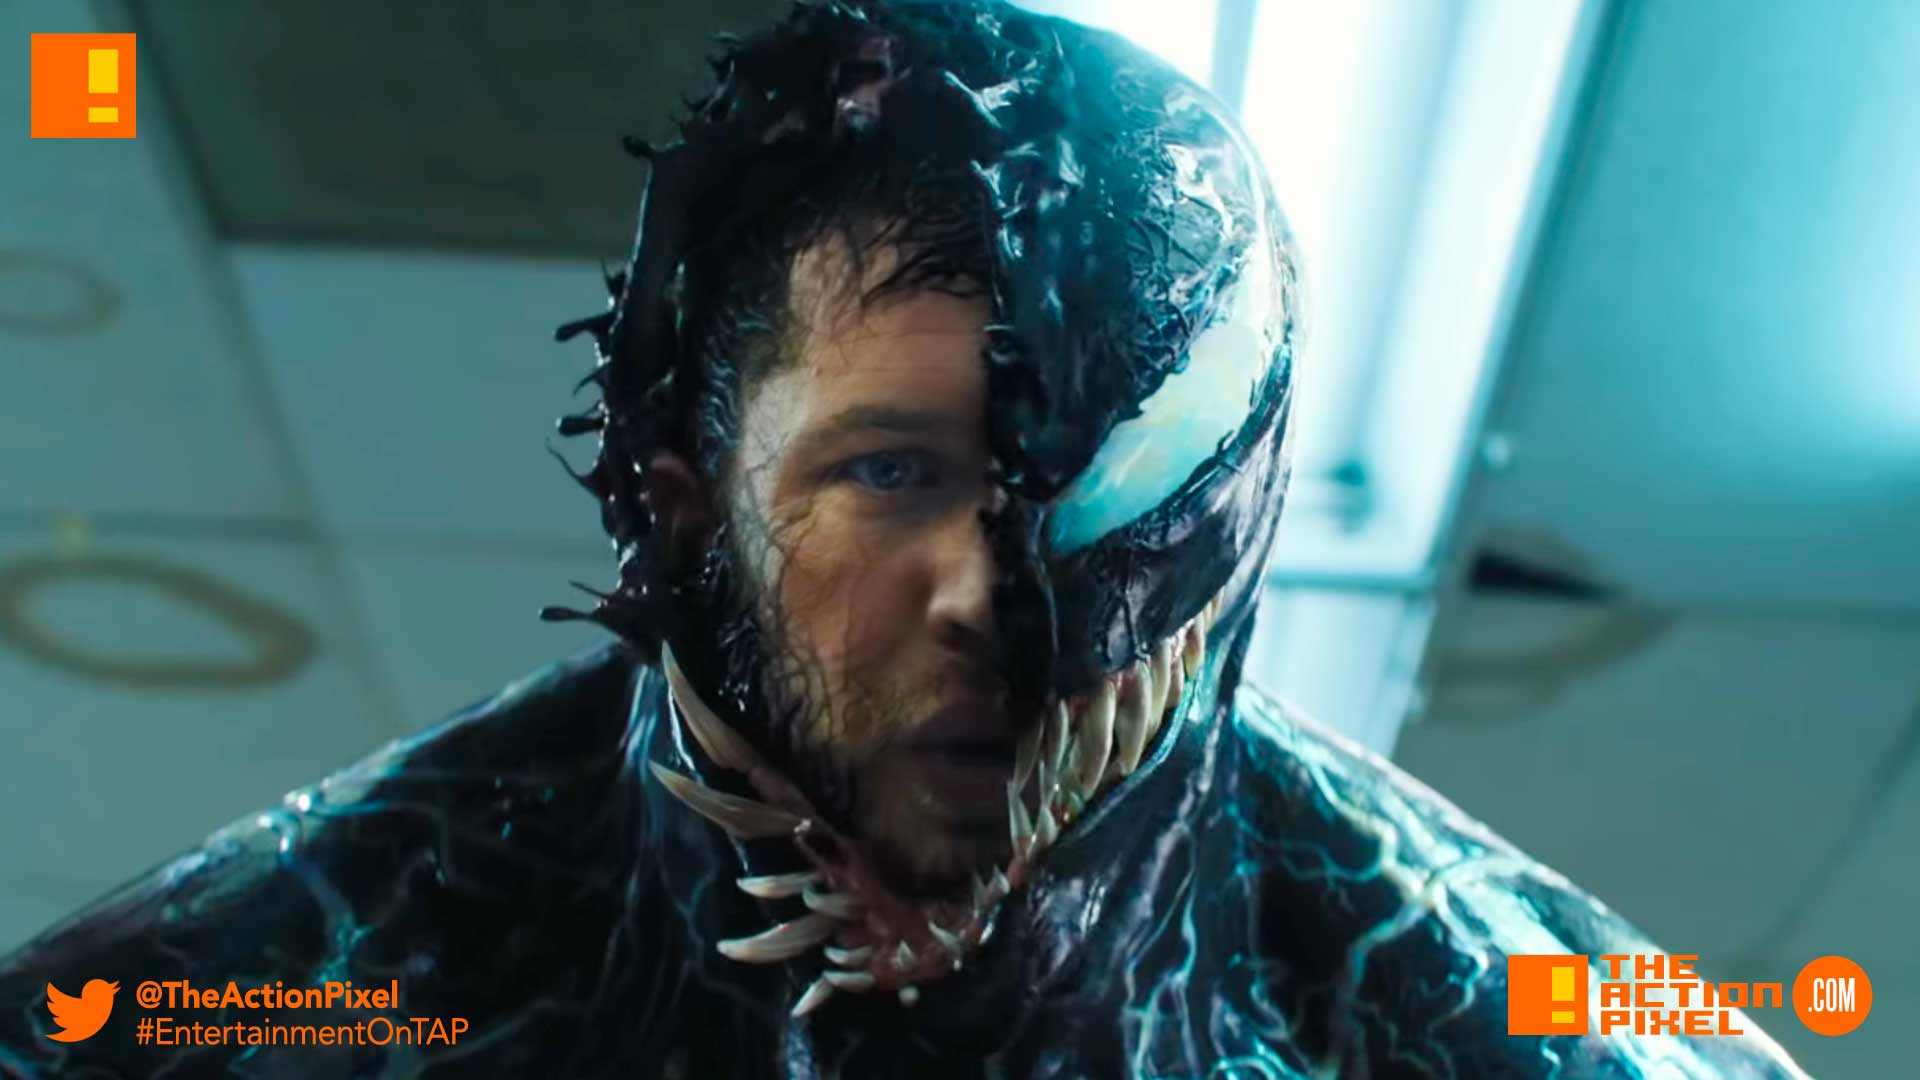 venom, tom hardy,poster, trailer, tom hardy, venom, spider-man, spin-off, the action pixel, entertainment on tap,sony pictures,official trailer, entertainment weekly, trailer 2,